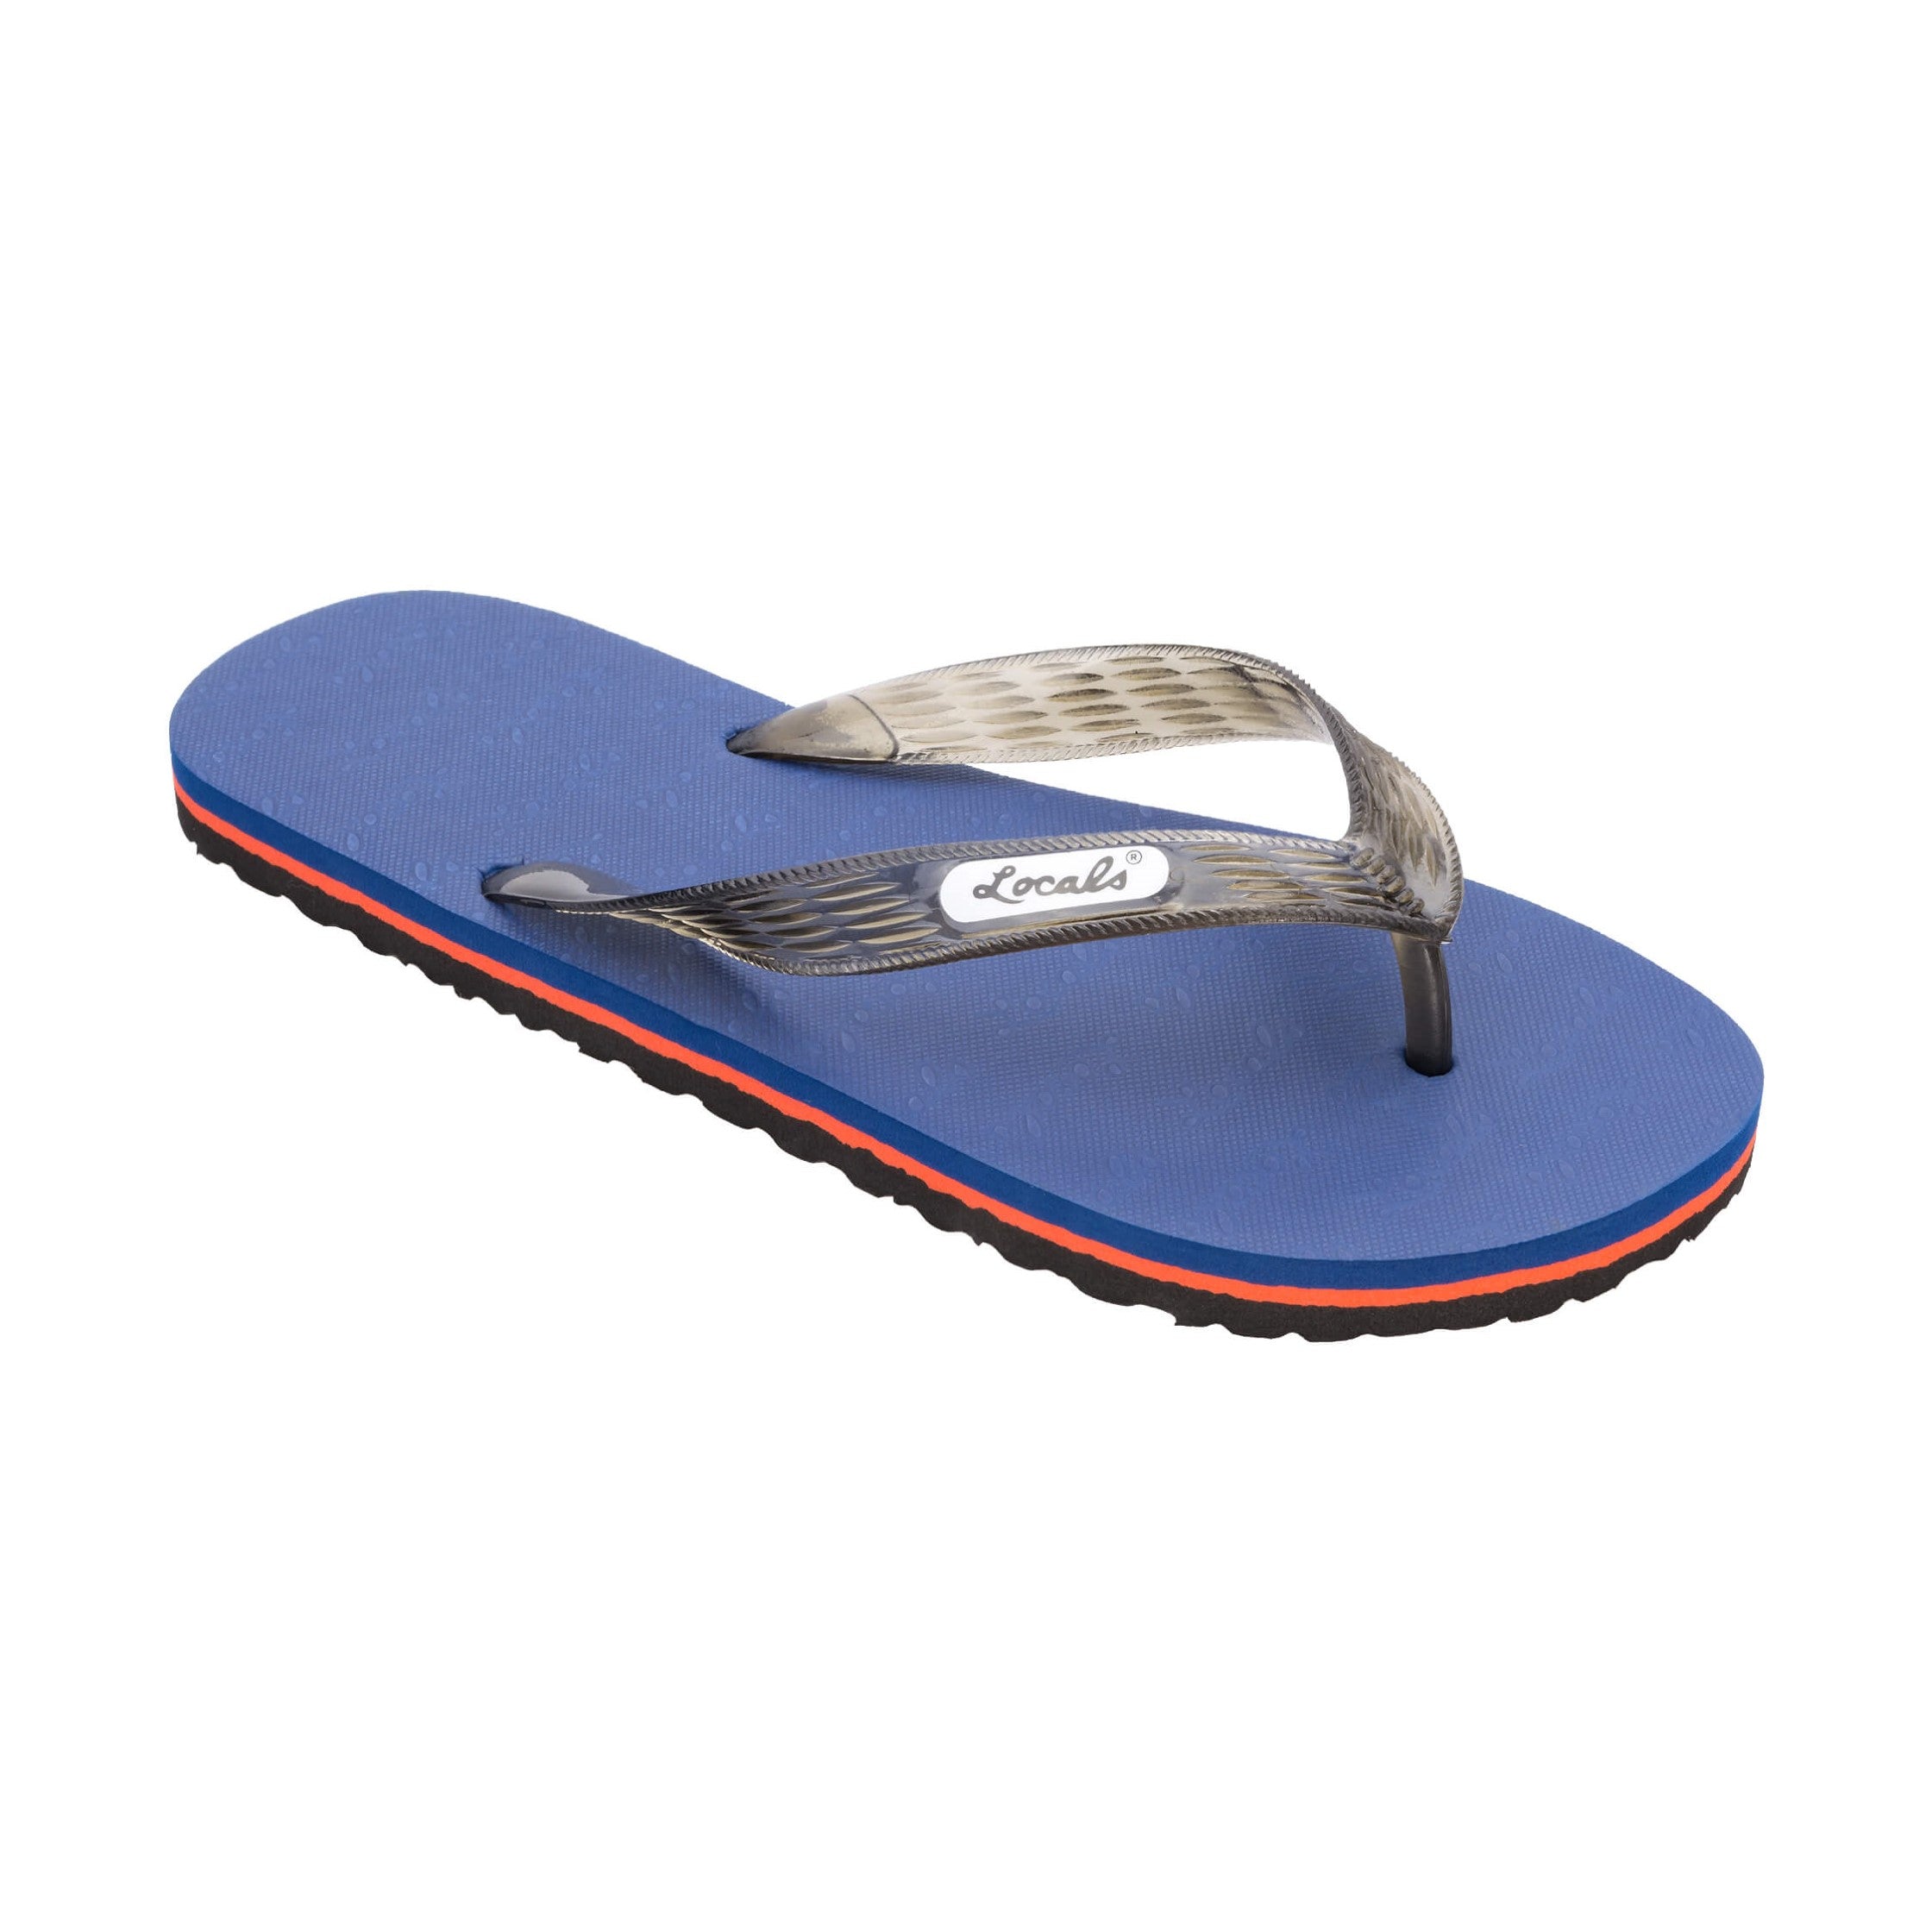 Locals Unisex Stripe Navy Flip Flops featuring a Blue/Black platform with a Red stripe and a Translucent Black strap.